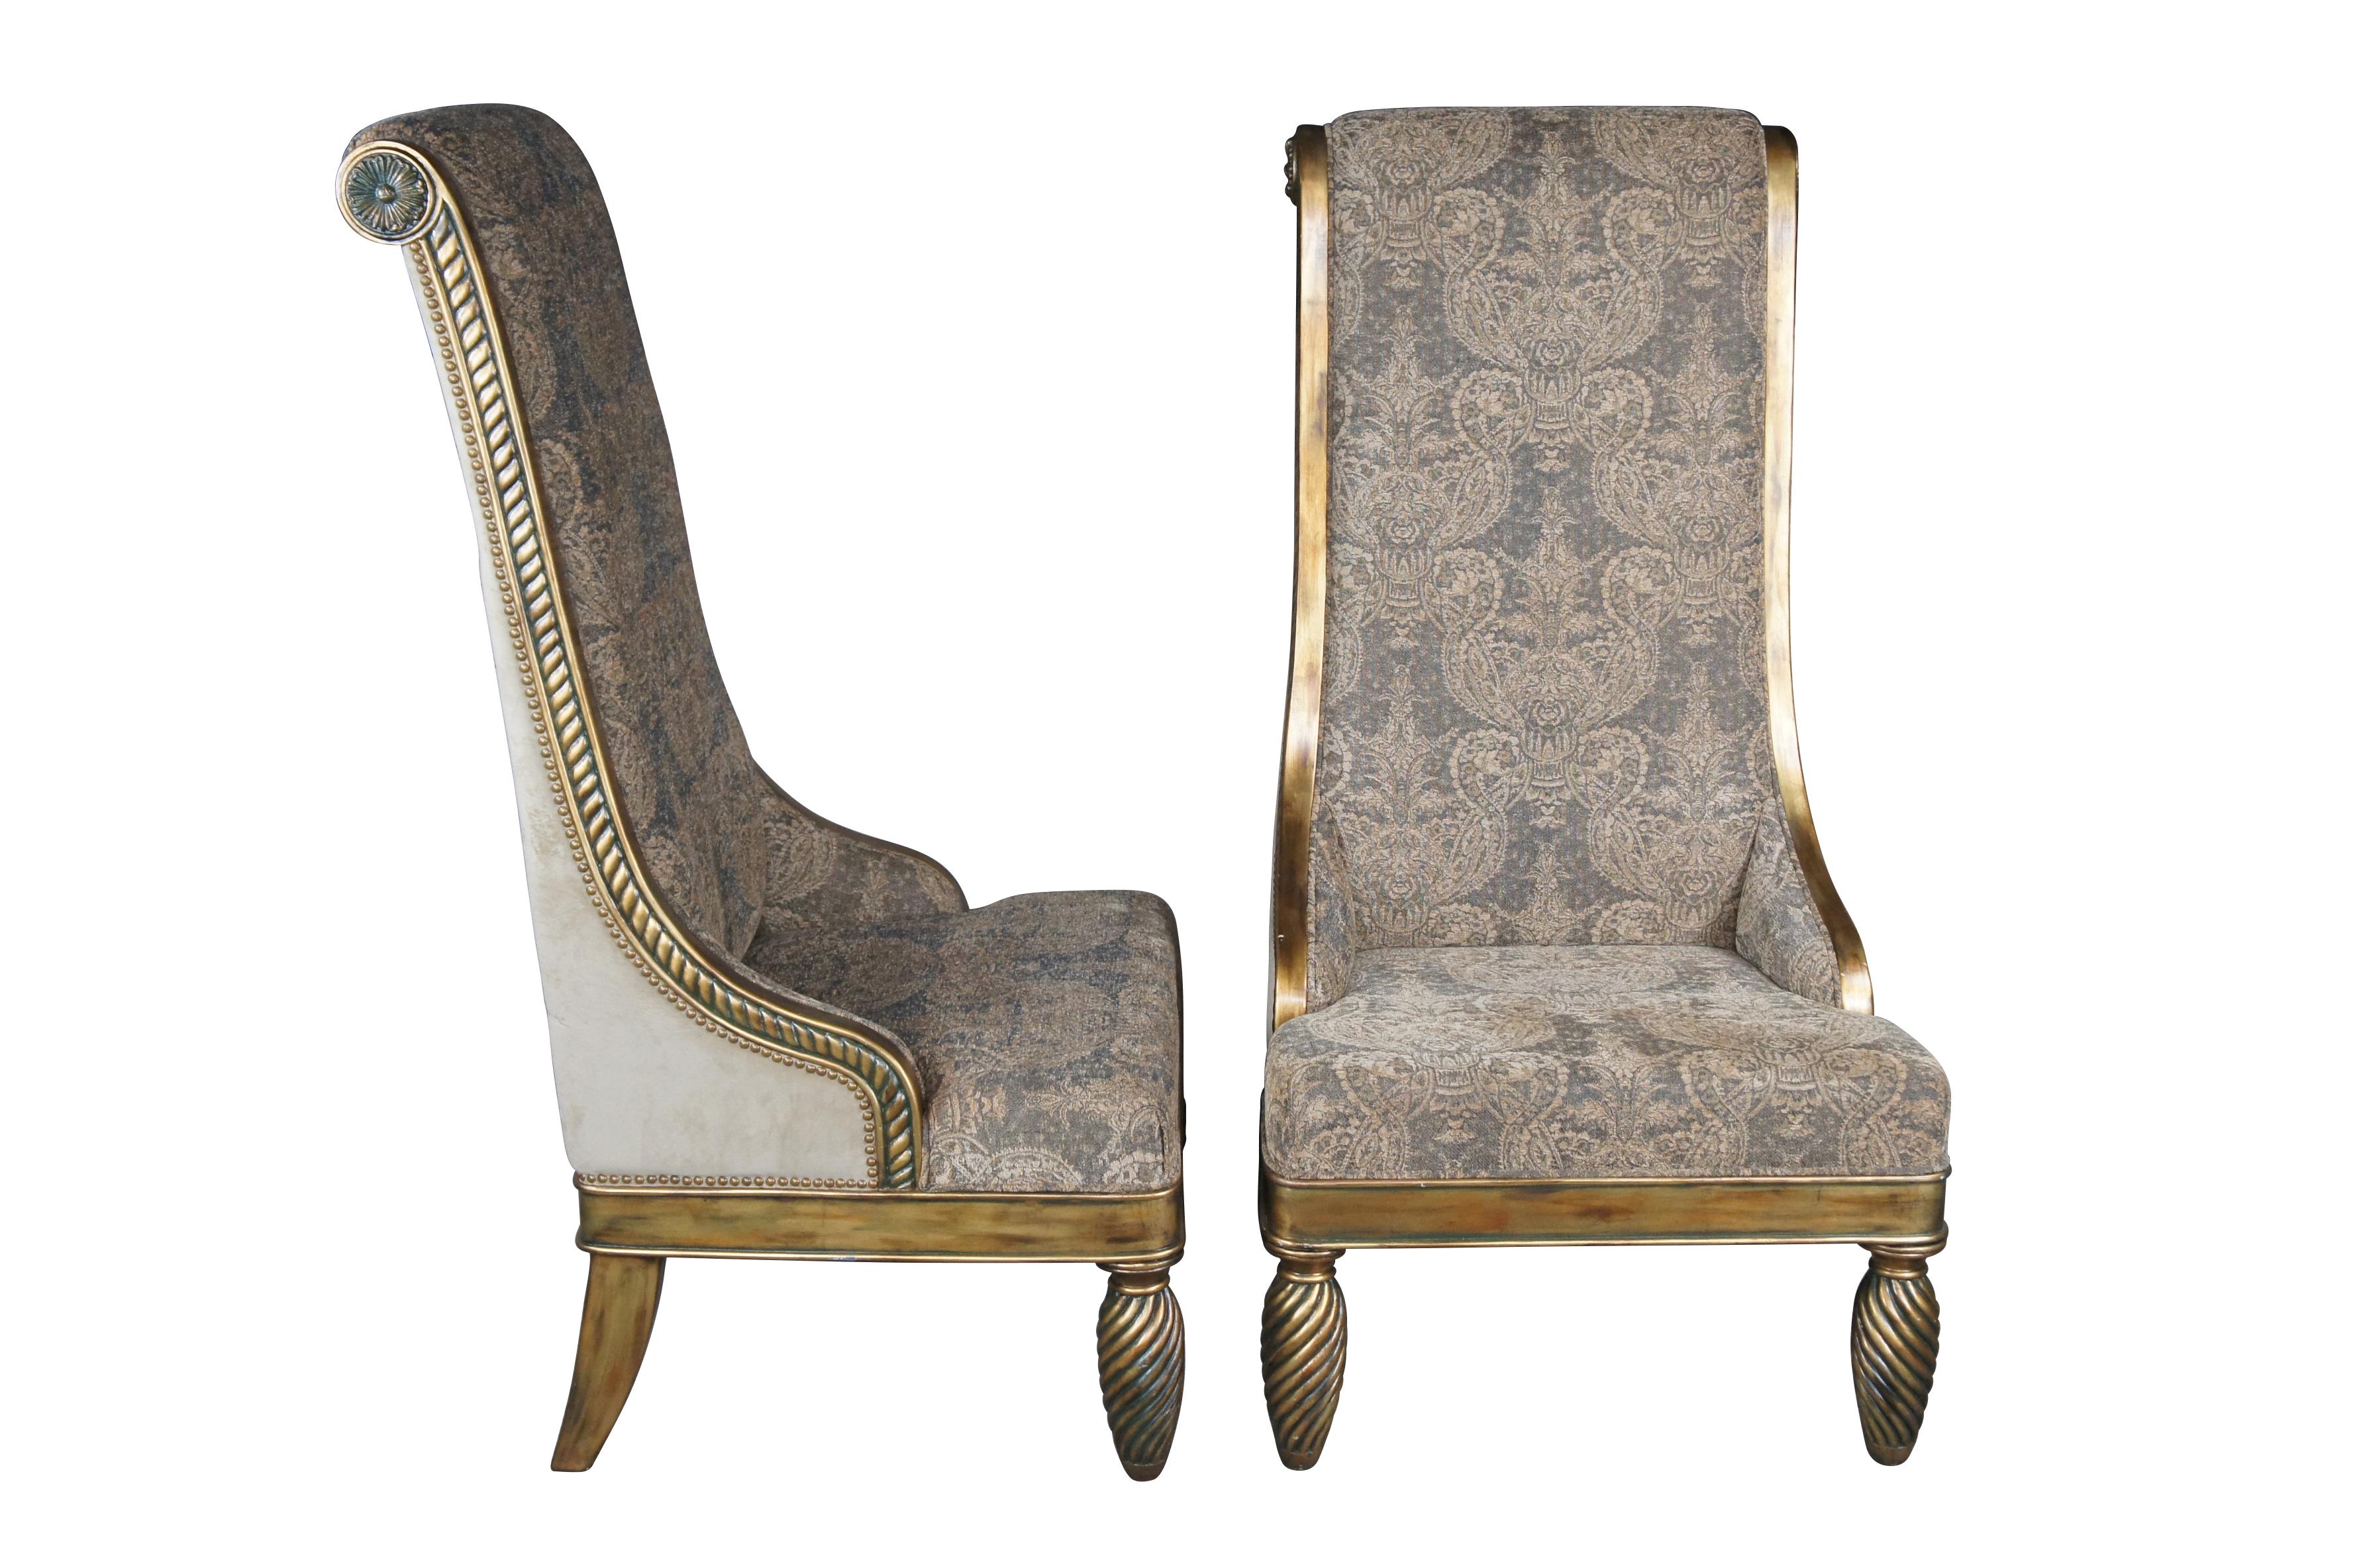 Pair of Hollywood Regency throne chairs featuring oversized gold frames with high rolled backs, accented with medallions and notched design, supported by twisted and flared legs, and upholstered with a velvet / suede nailhead